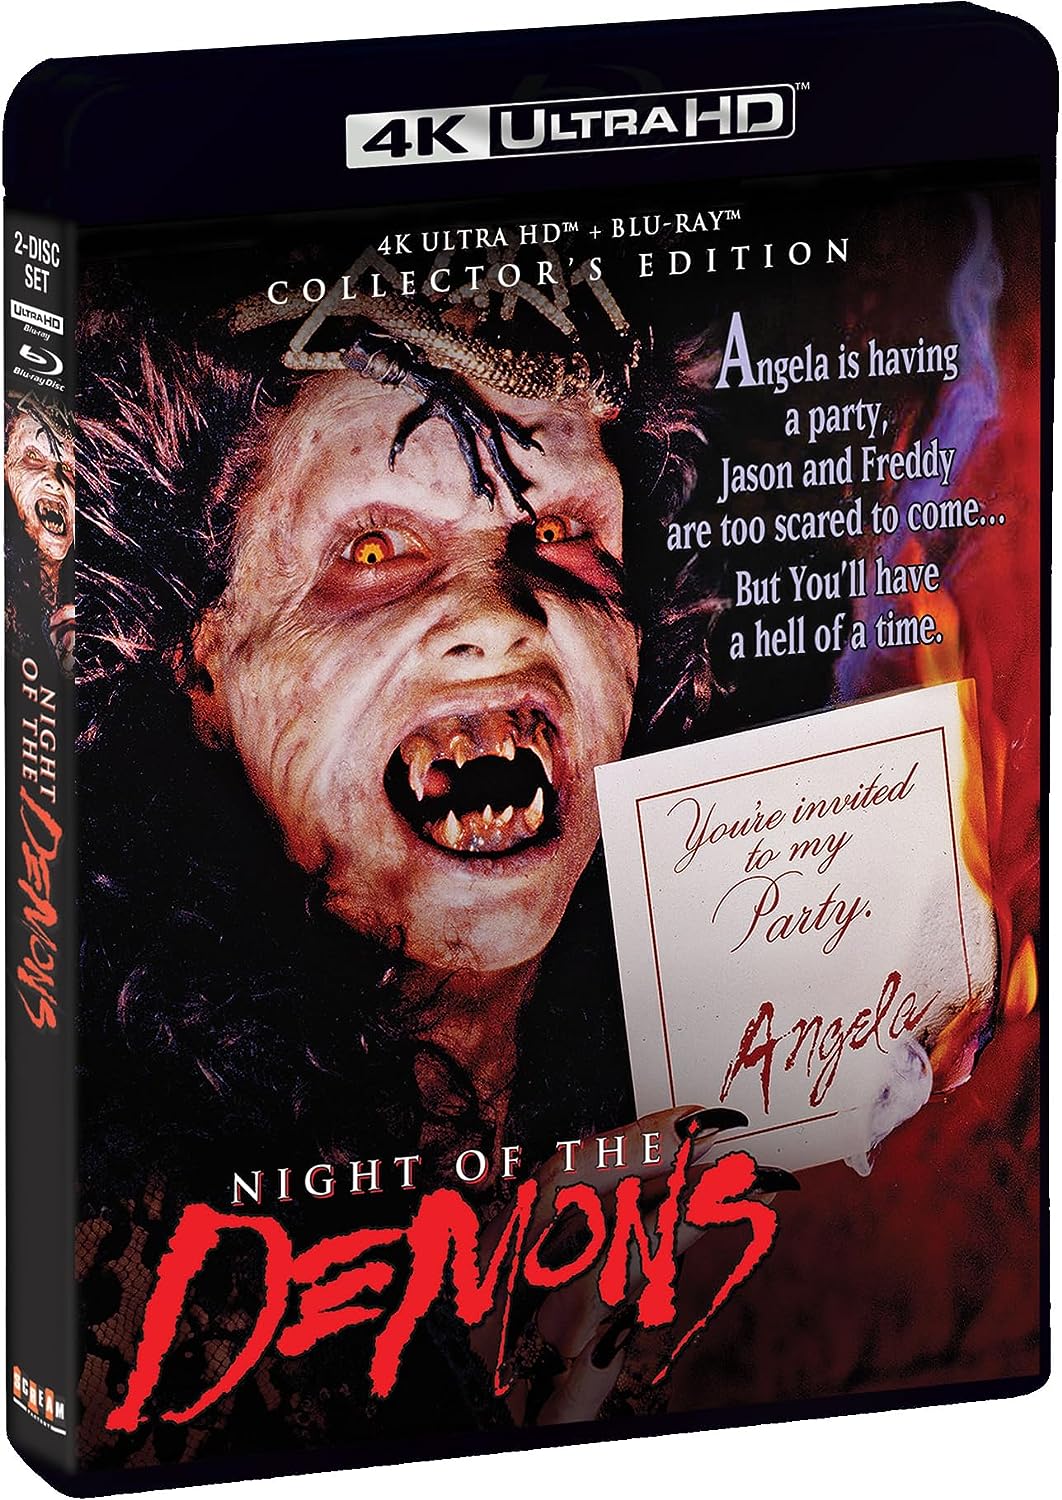 Night Of The Demons Collector's Edition 4K UHD + Blu-ray with Slipcover (Scream Factory)